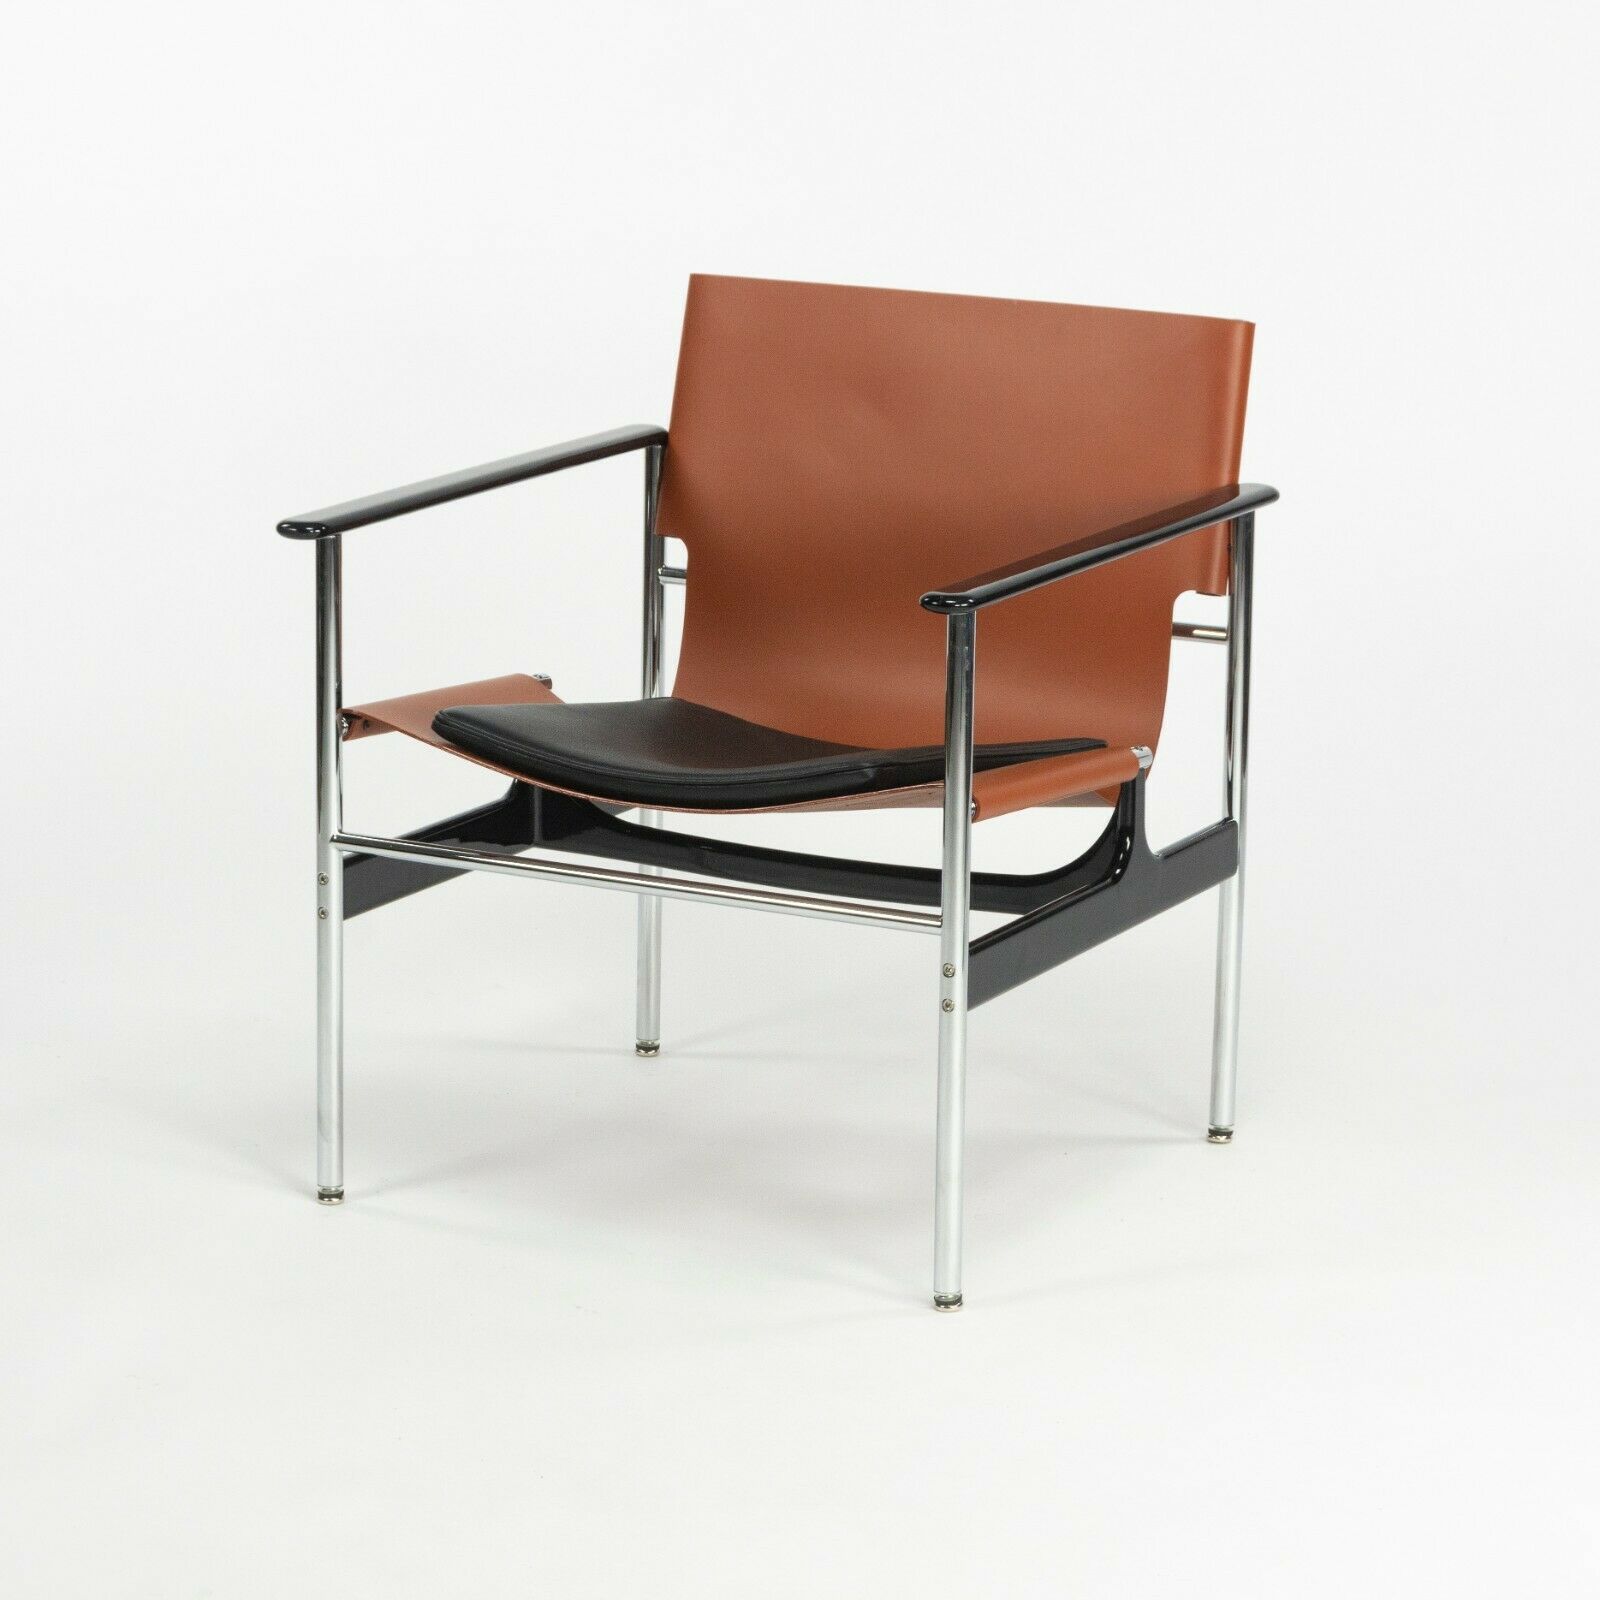 SOLD 2020 Charles Pollock for Knoll Sling Arm Chair Cognac & Black Leather Chrome 657